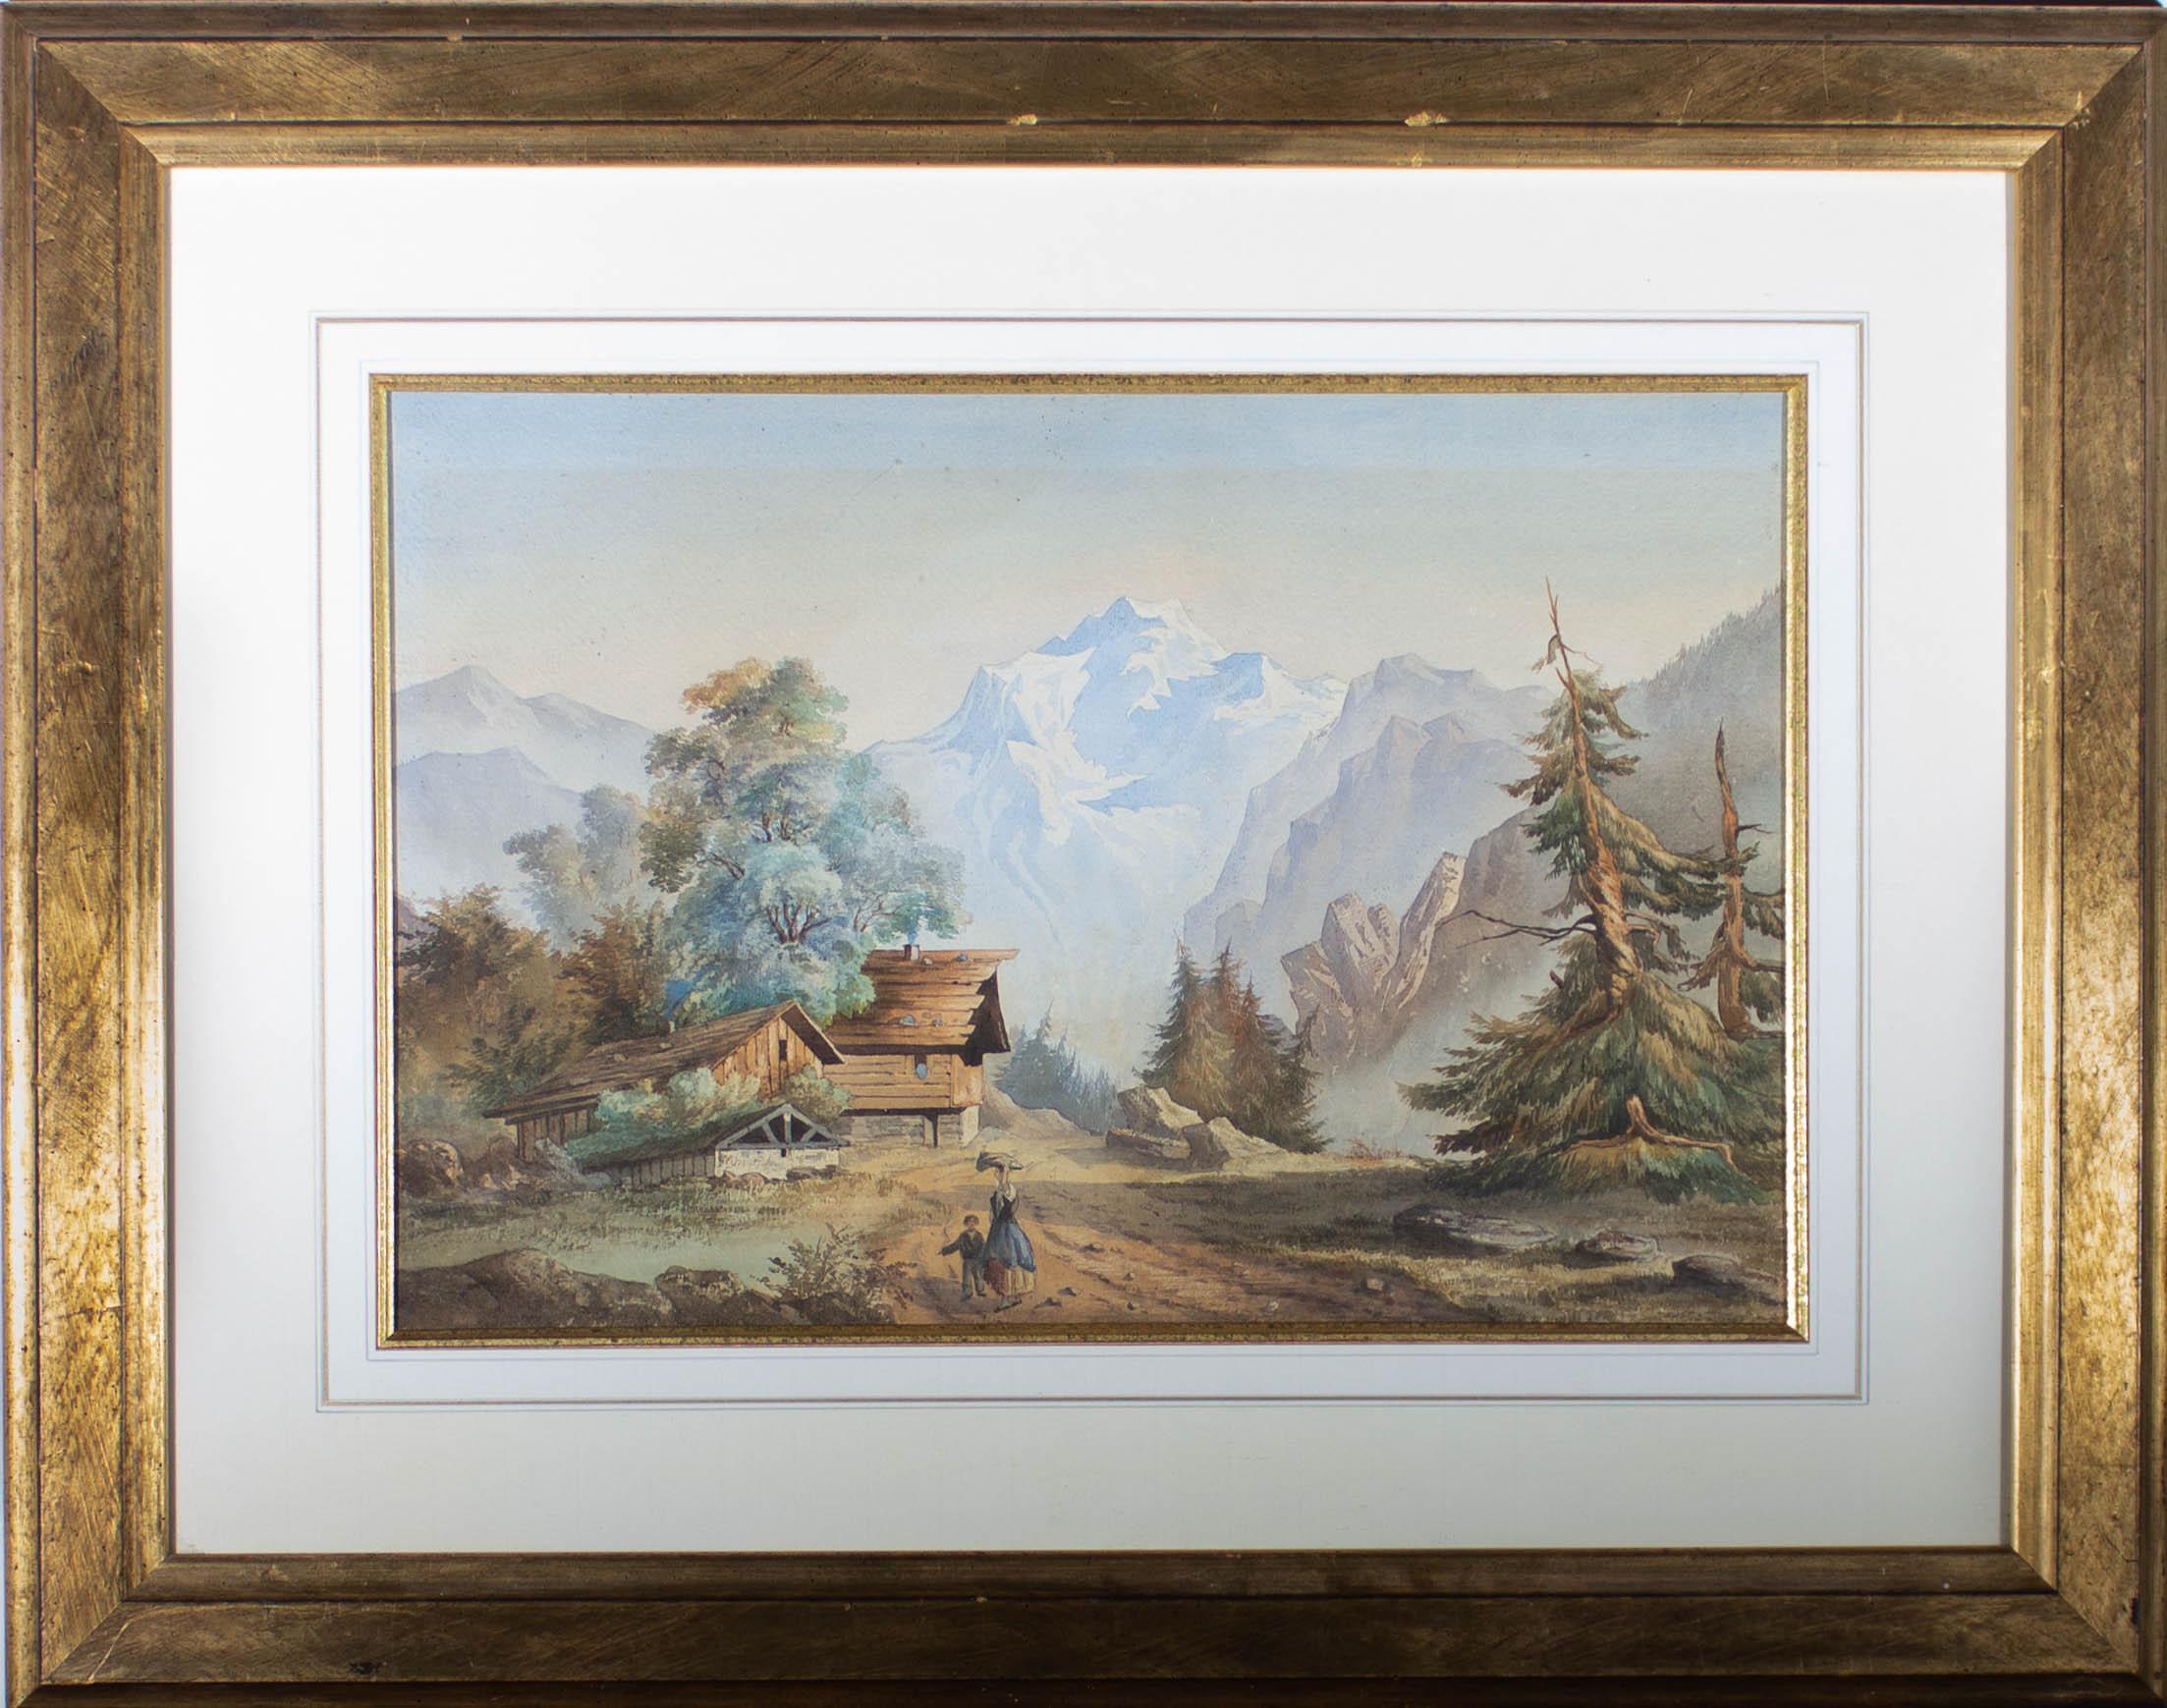 Unknown Landscape Art - Mid 19th Century Watercolour - Hamlet in the Mountains